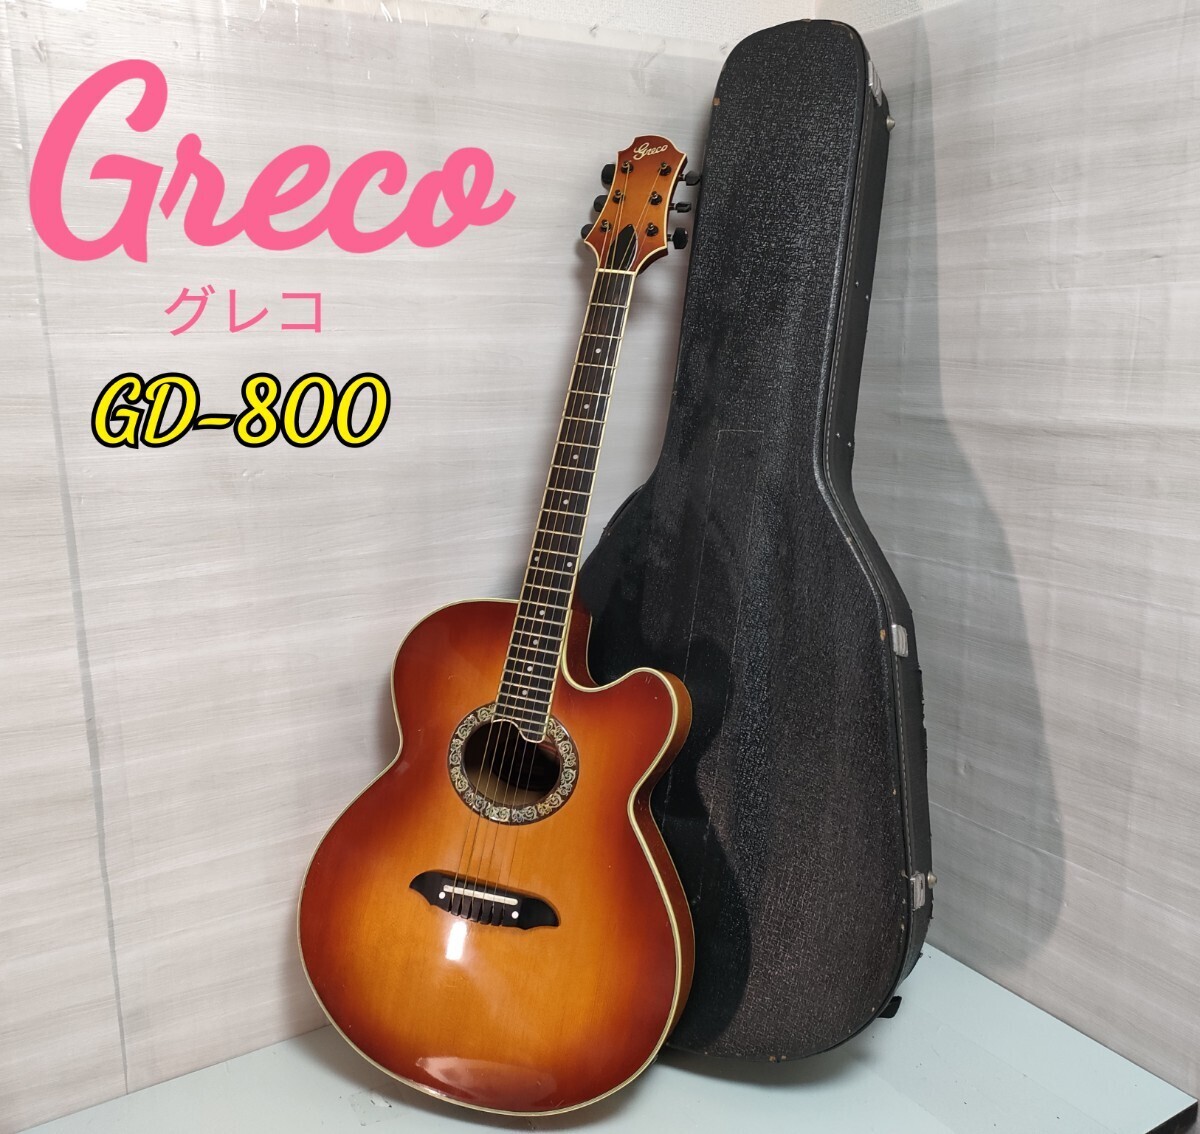 Greco Greco GD-800 electric acoustic guitar guitar [ present condition goods ] hard case attaching 